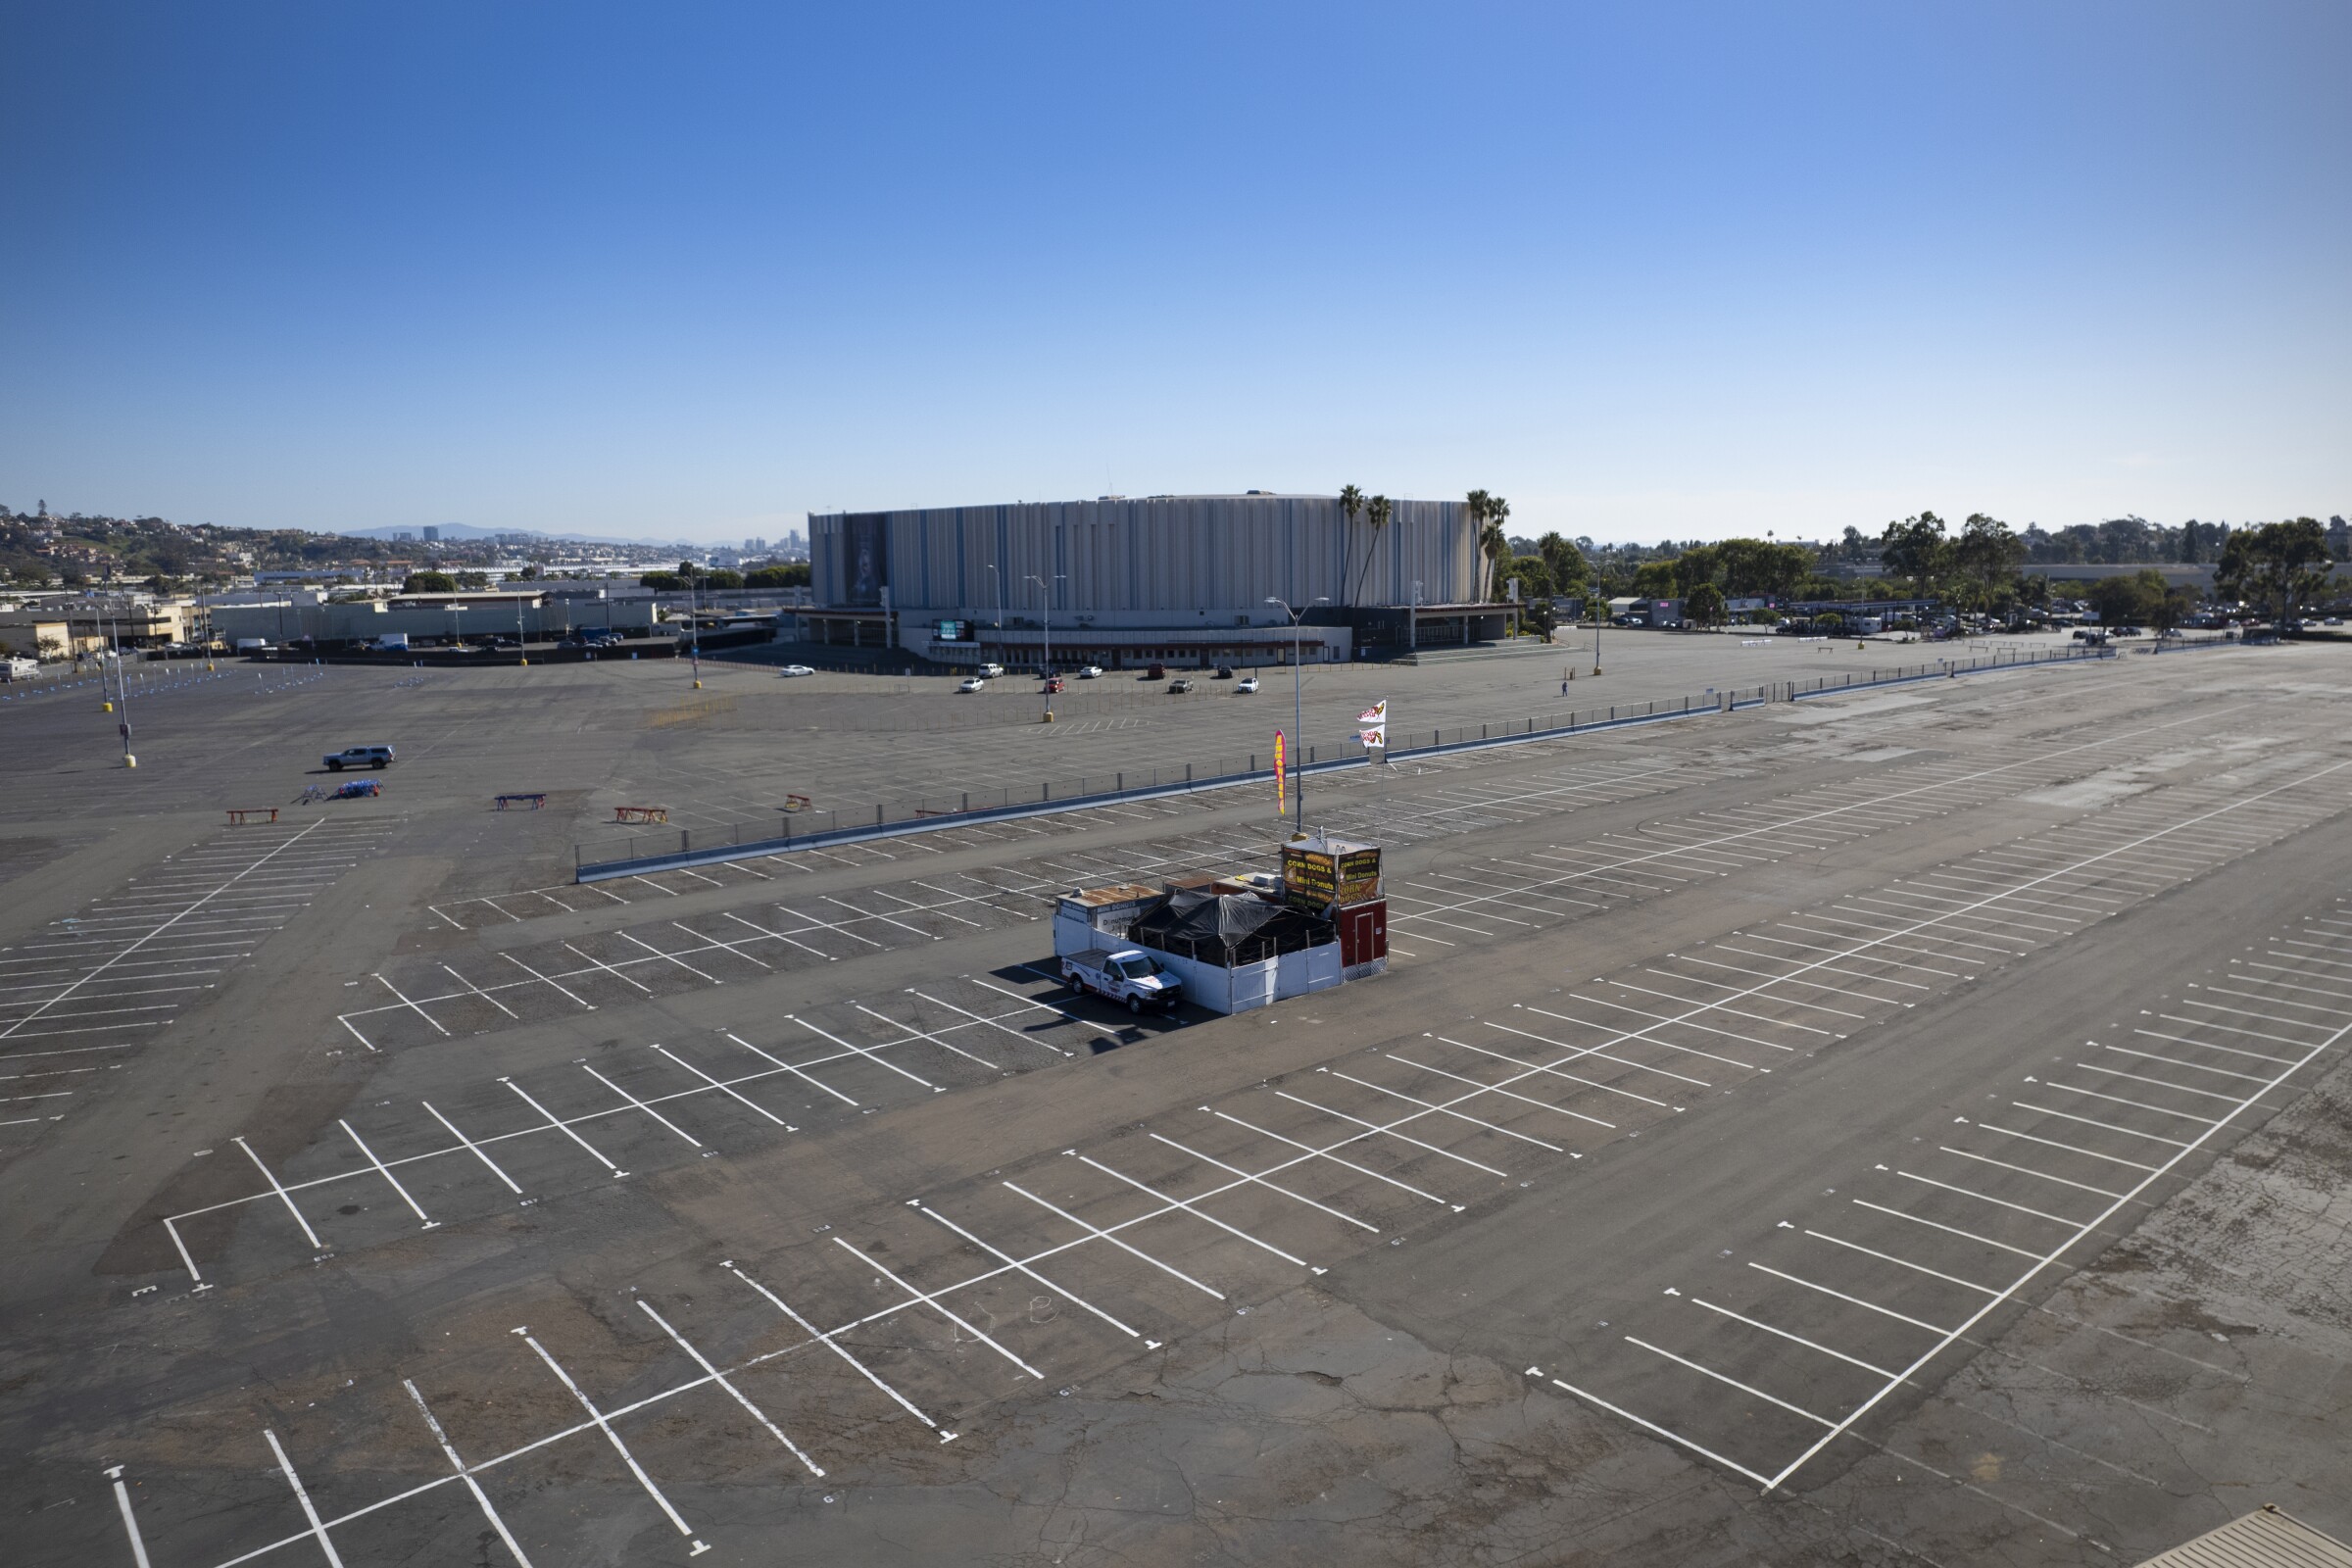 San Diego's sports arena site extends from 3220 Sports Arena Blvd.